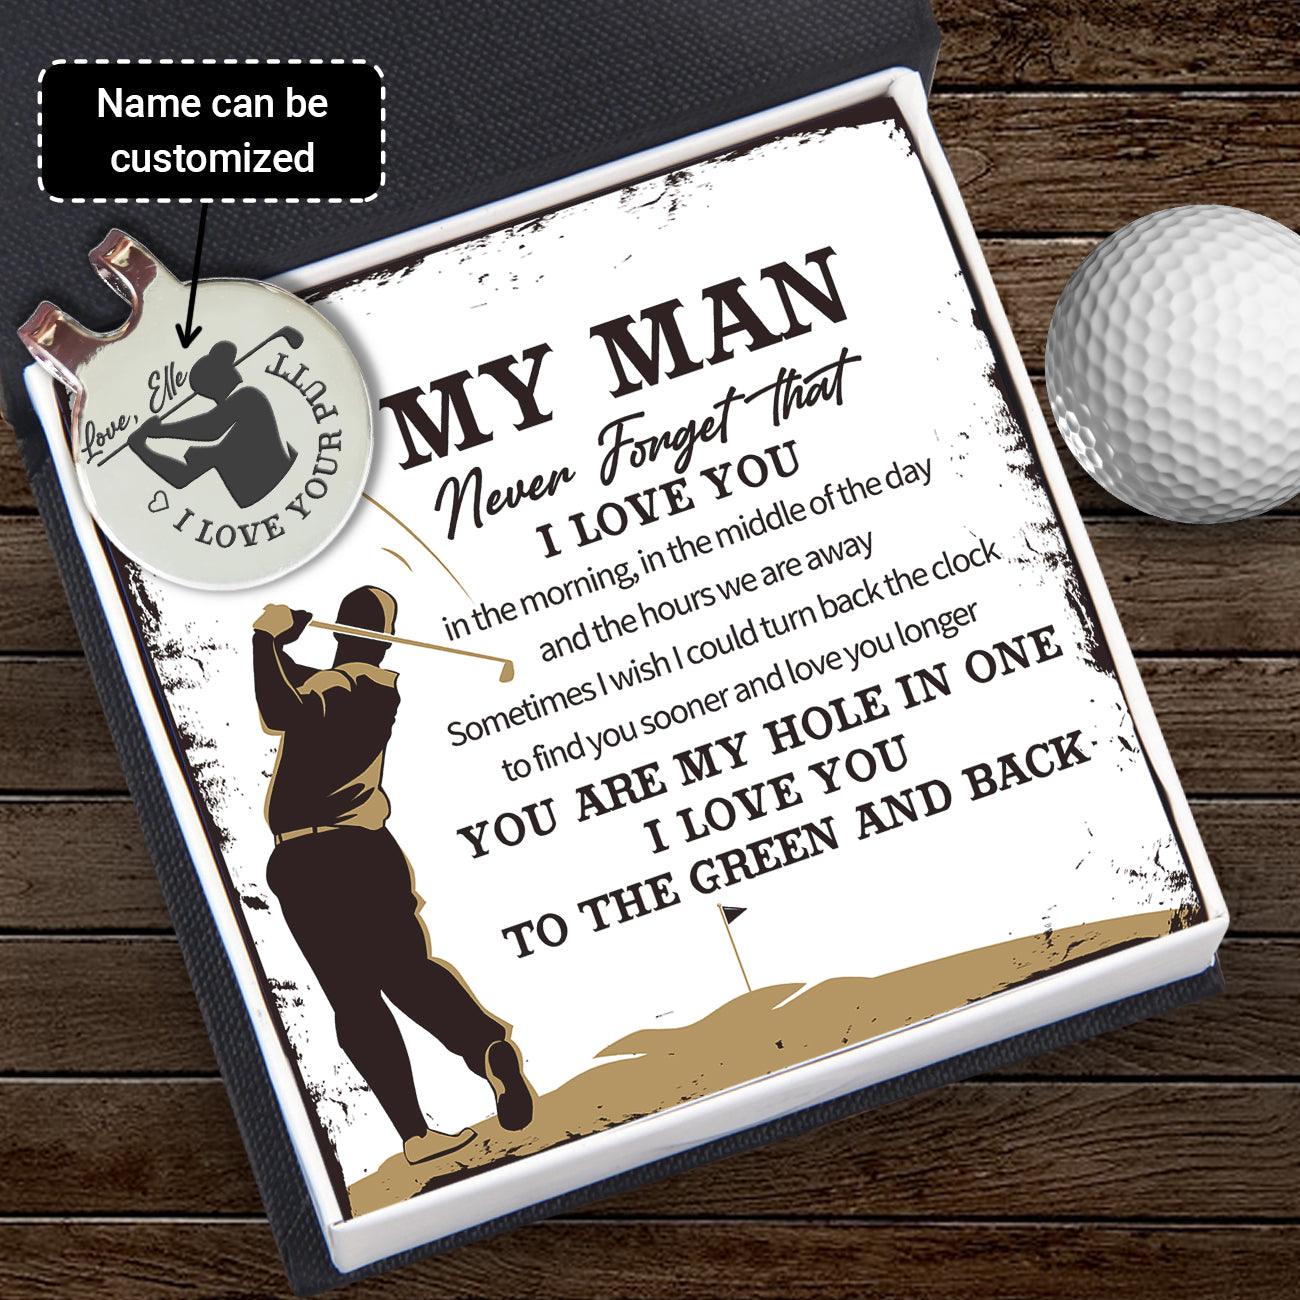 Personalised Golf Marker - Golf - To My Man - I Love Your Putt - Augata26004 - Gifts Holder